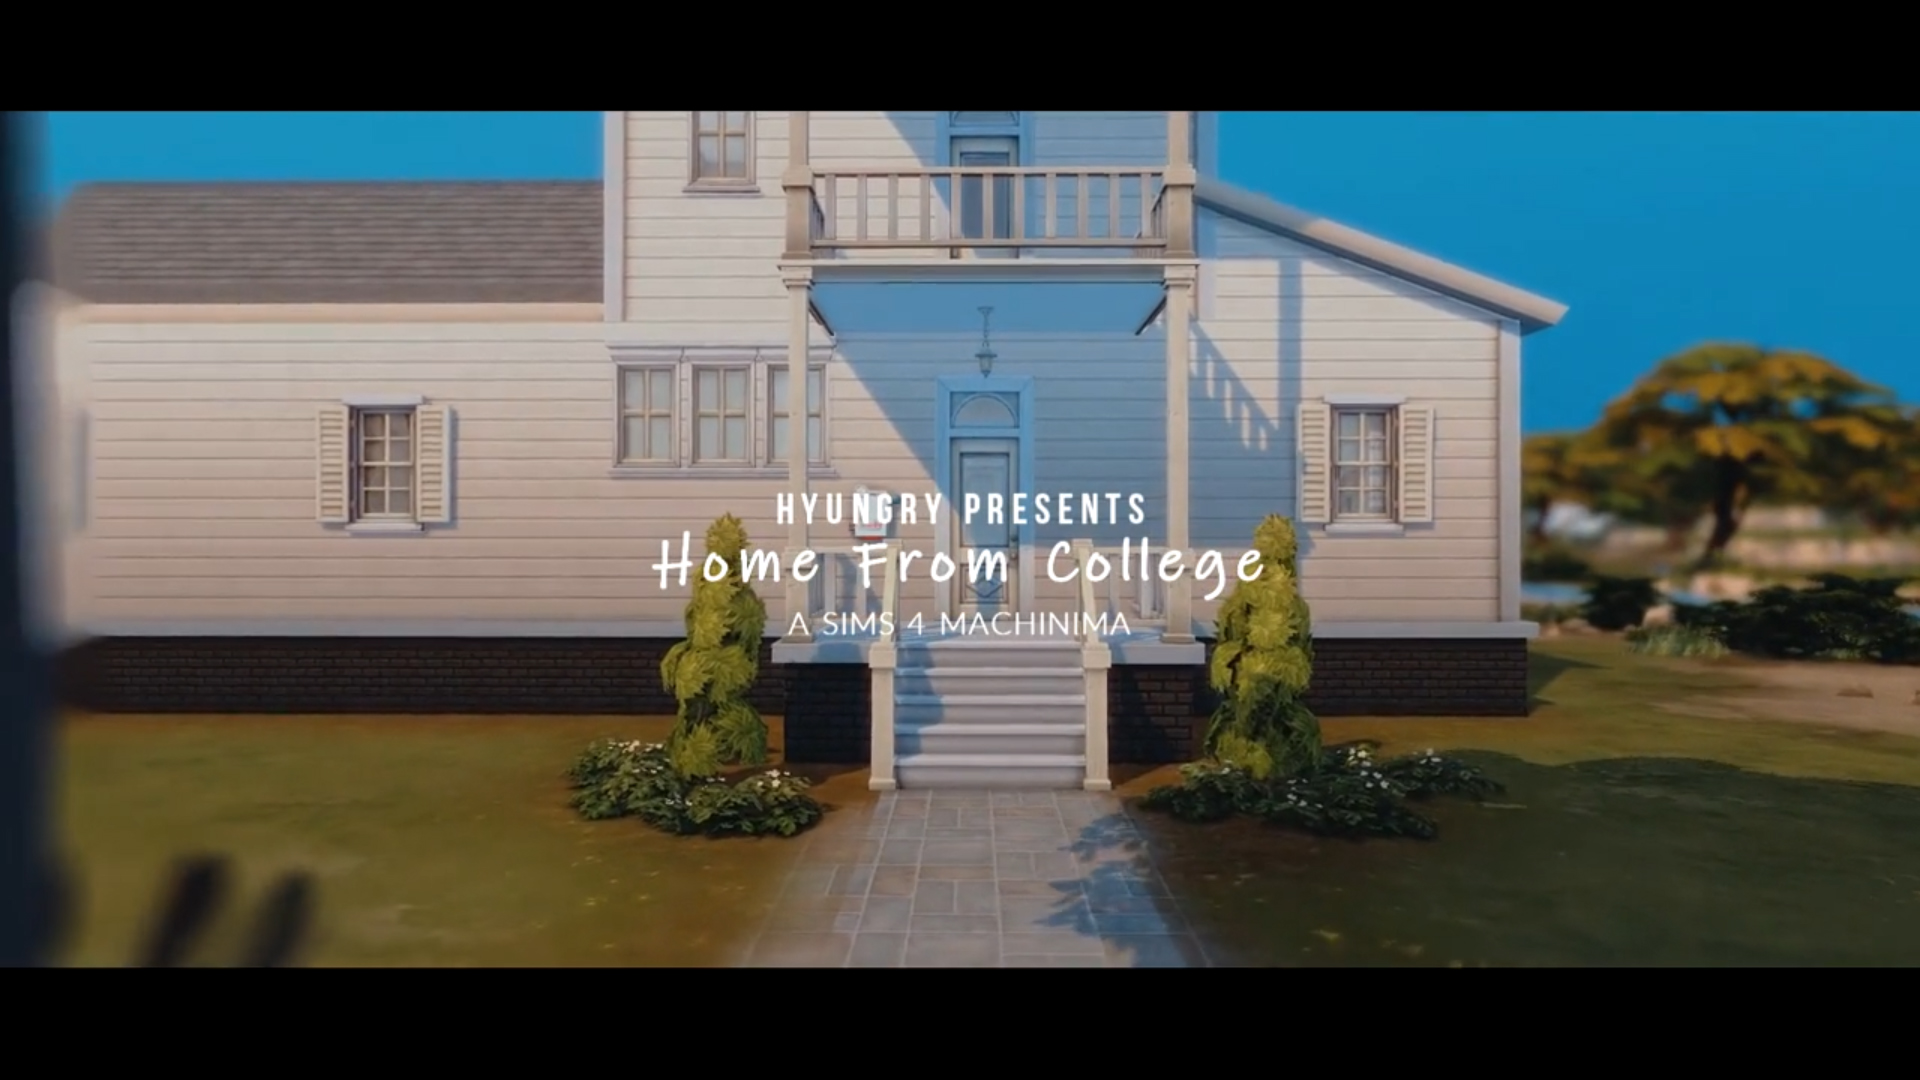 [ENG] Hyungry – Home From College 1